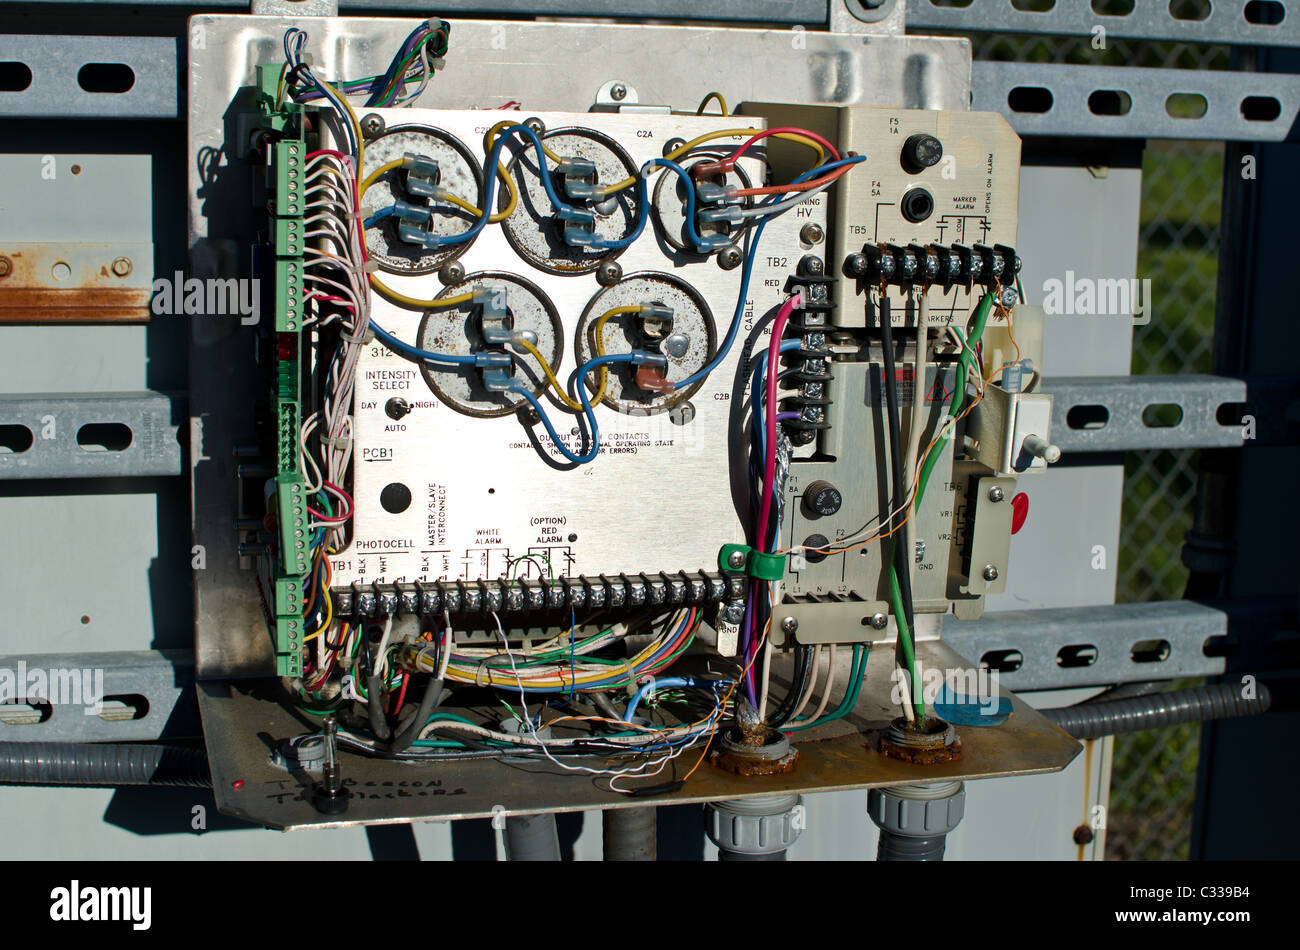 Flash lighting controller for a wireless telecom tower. Stock Photo